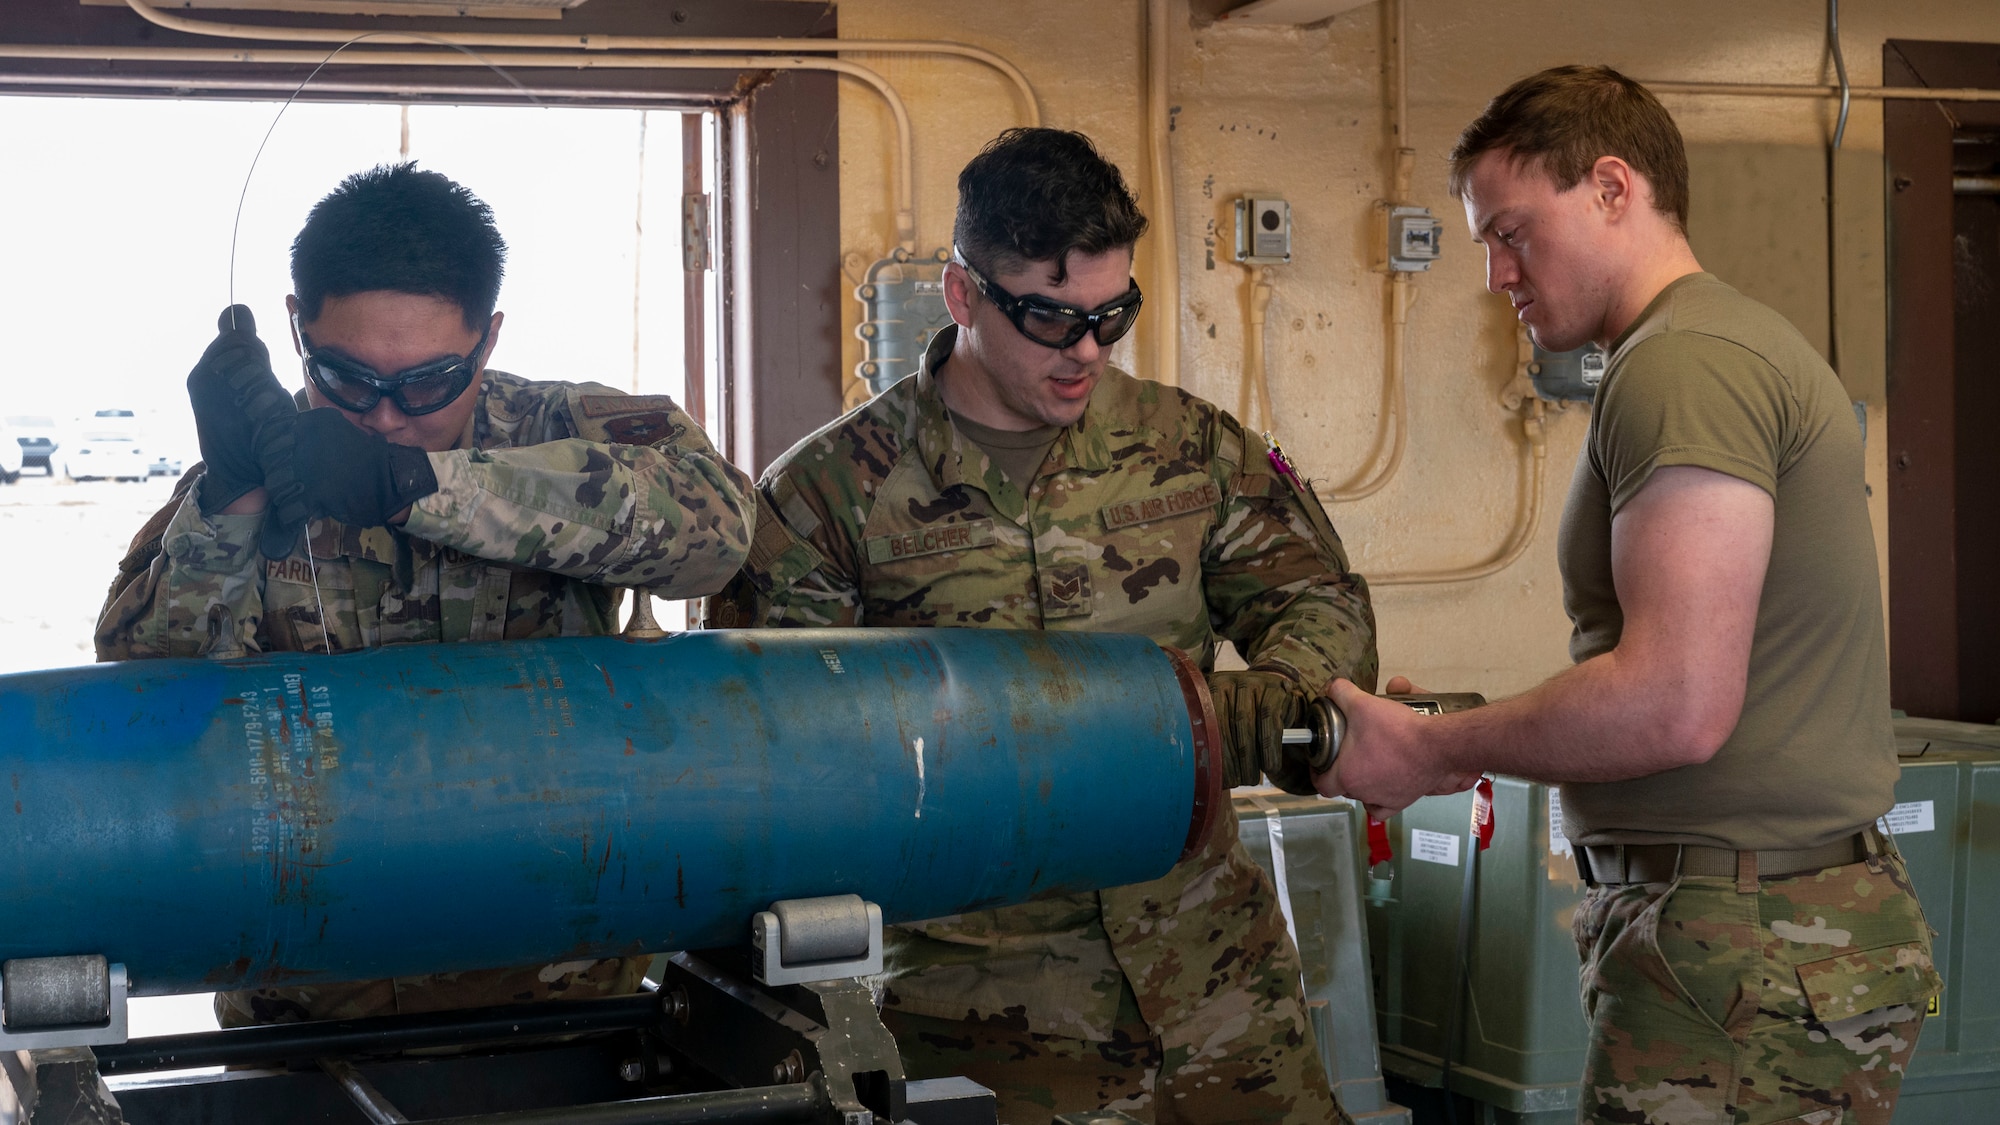 U.S. Air Force Tech. Sgt. Richard Fardy, 49th Equipment Maintenance Squadron munitions inspector, left, undergoes combat munitions training with U.S. Air Force Staff Sgt. Rodney Belcher, 49th EMS conventional maintenance crew chief, center, and U.S. Air Force Airman Jeremiah McFarland, precision guided munitions crew member, at Holloman Air Force Base, New Mexico, May 18, 2023.